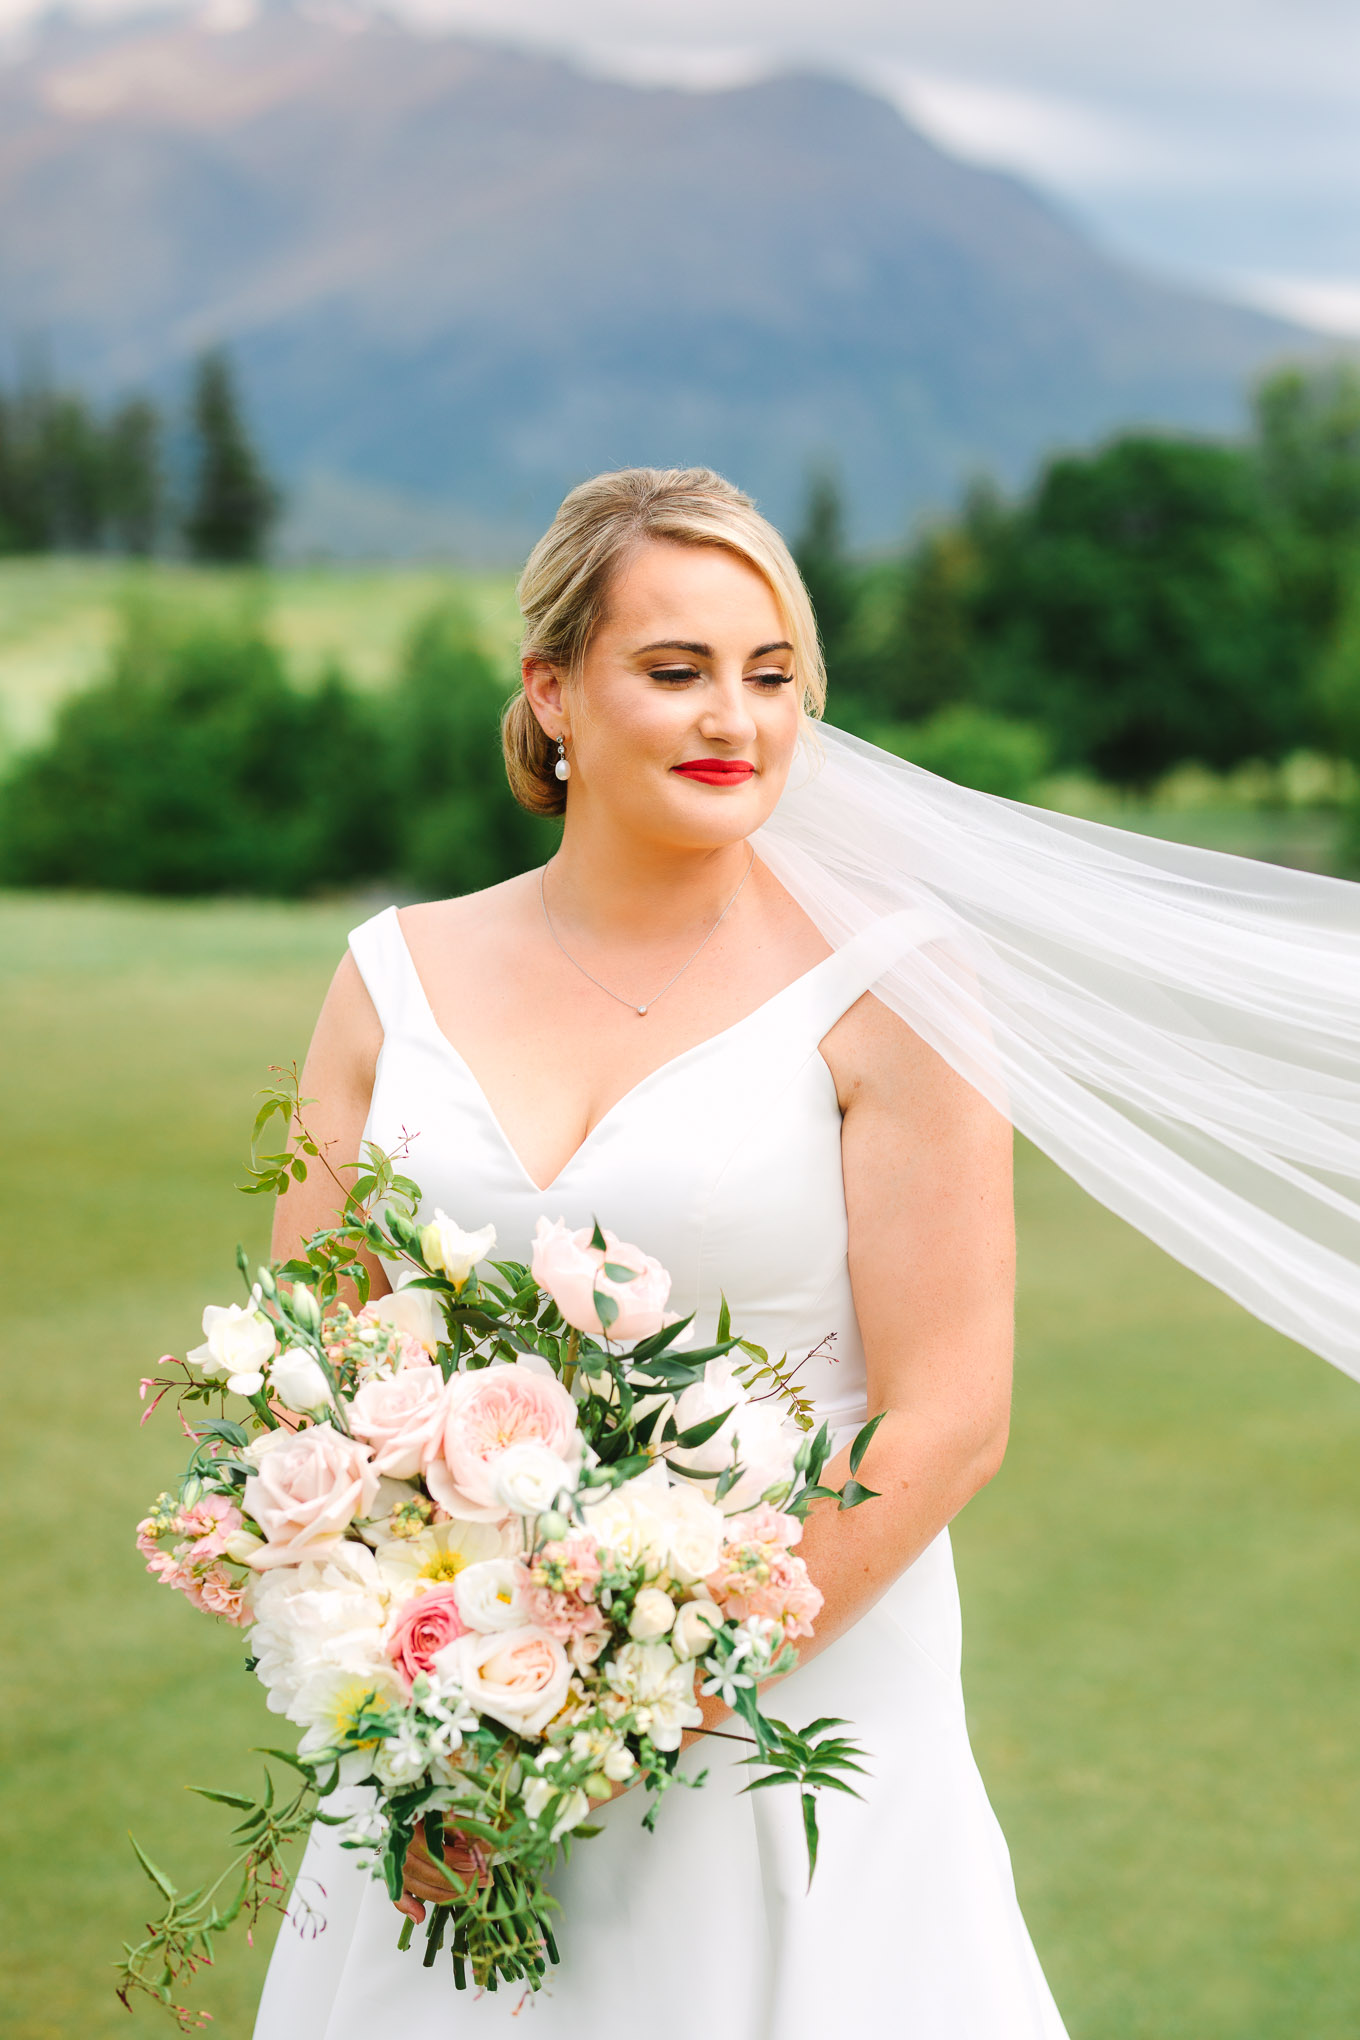 Classic bridal portrait with off-the-shoulder gown and romantic pink and white bridal bouquet. Millbrook Resort Queenstown New Zealand wedding by Mary Costa Photography | www.marycostaweddings.com